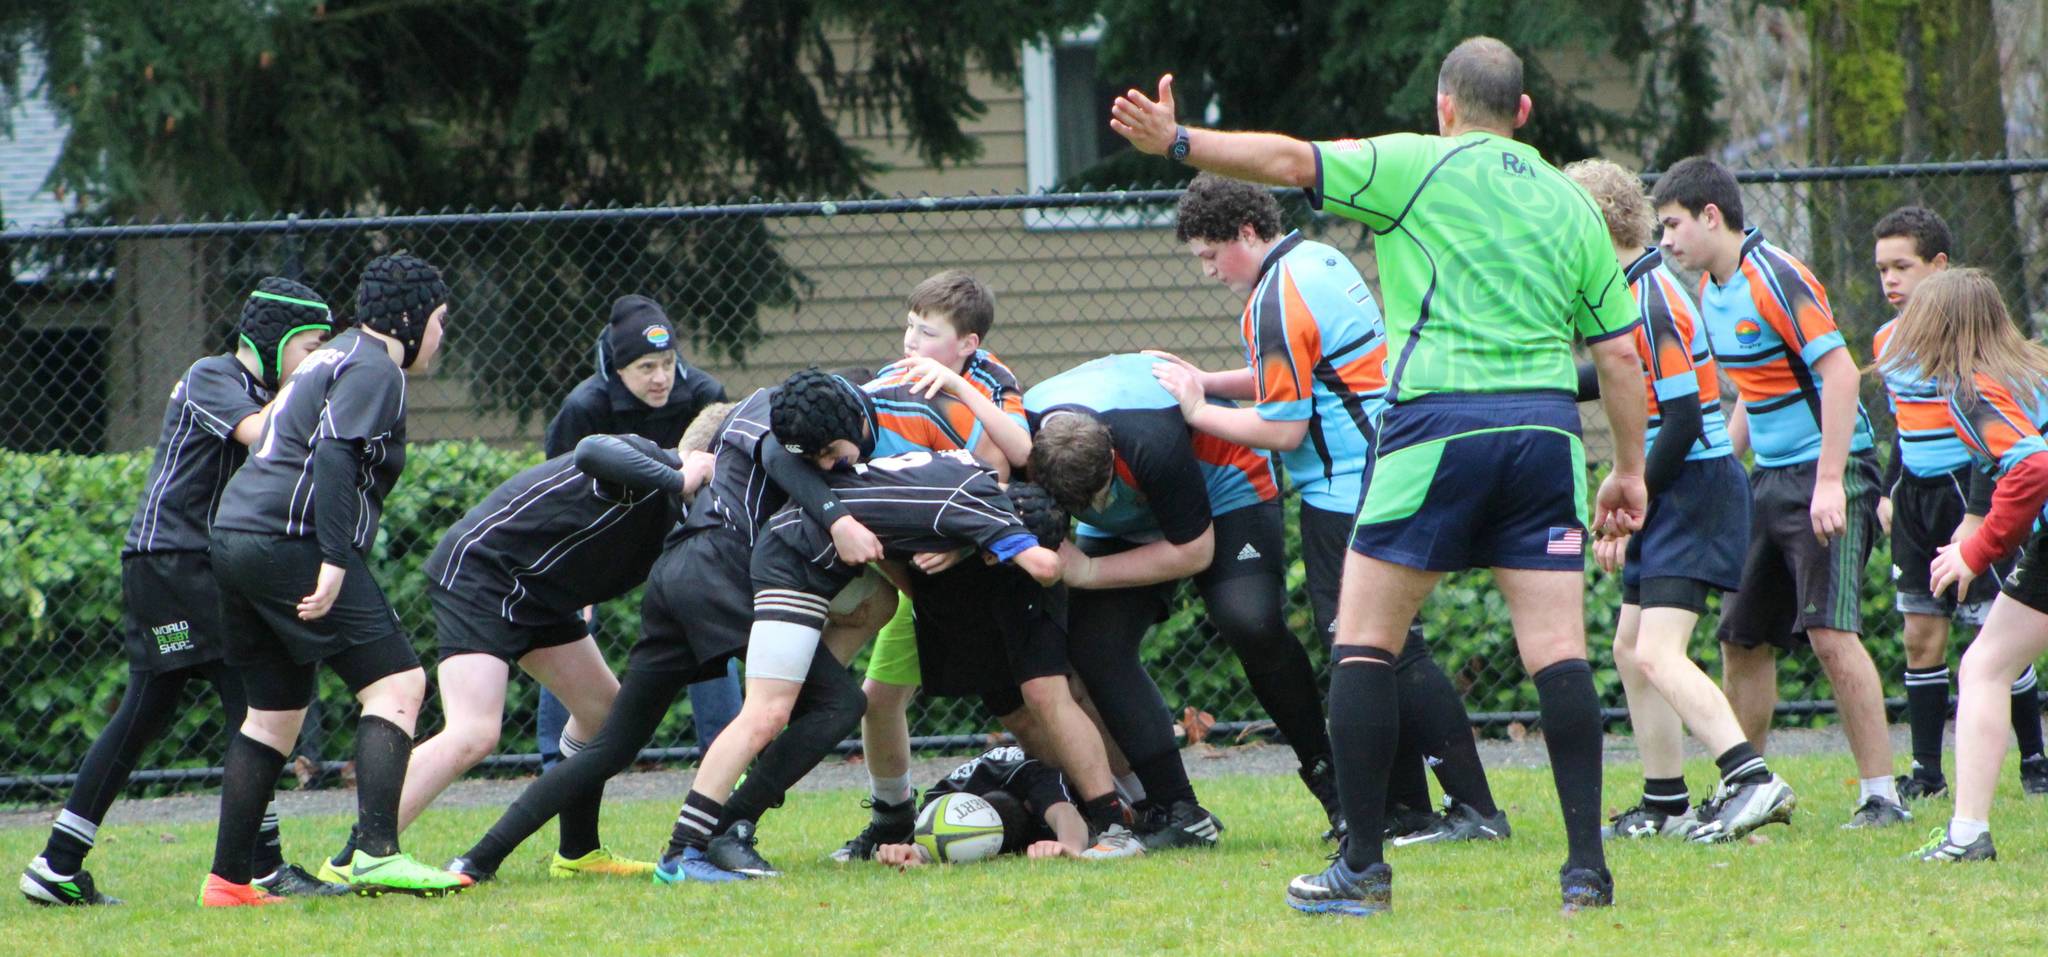 Rugby season is rolling in the Northwest. The Eastside’s Panthers Youth Rugby Club is sporting teams in the U10, U12 and U14 divisions. For information, check their Facebook page at &lt;a href="https://www.facebook.com/panthersyouthrugby" target="_blank"&gt;https://www.facebook.com/panthersyouthrugby&lt;/a&gt;, and their To register to play, visit &lt;a href="http://www.PanthersYouthRugby.com" target="_blank"&gt;www.PanthersYouthRugby.com&lt;/a&gt;.